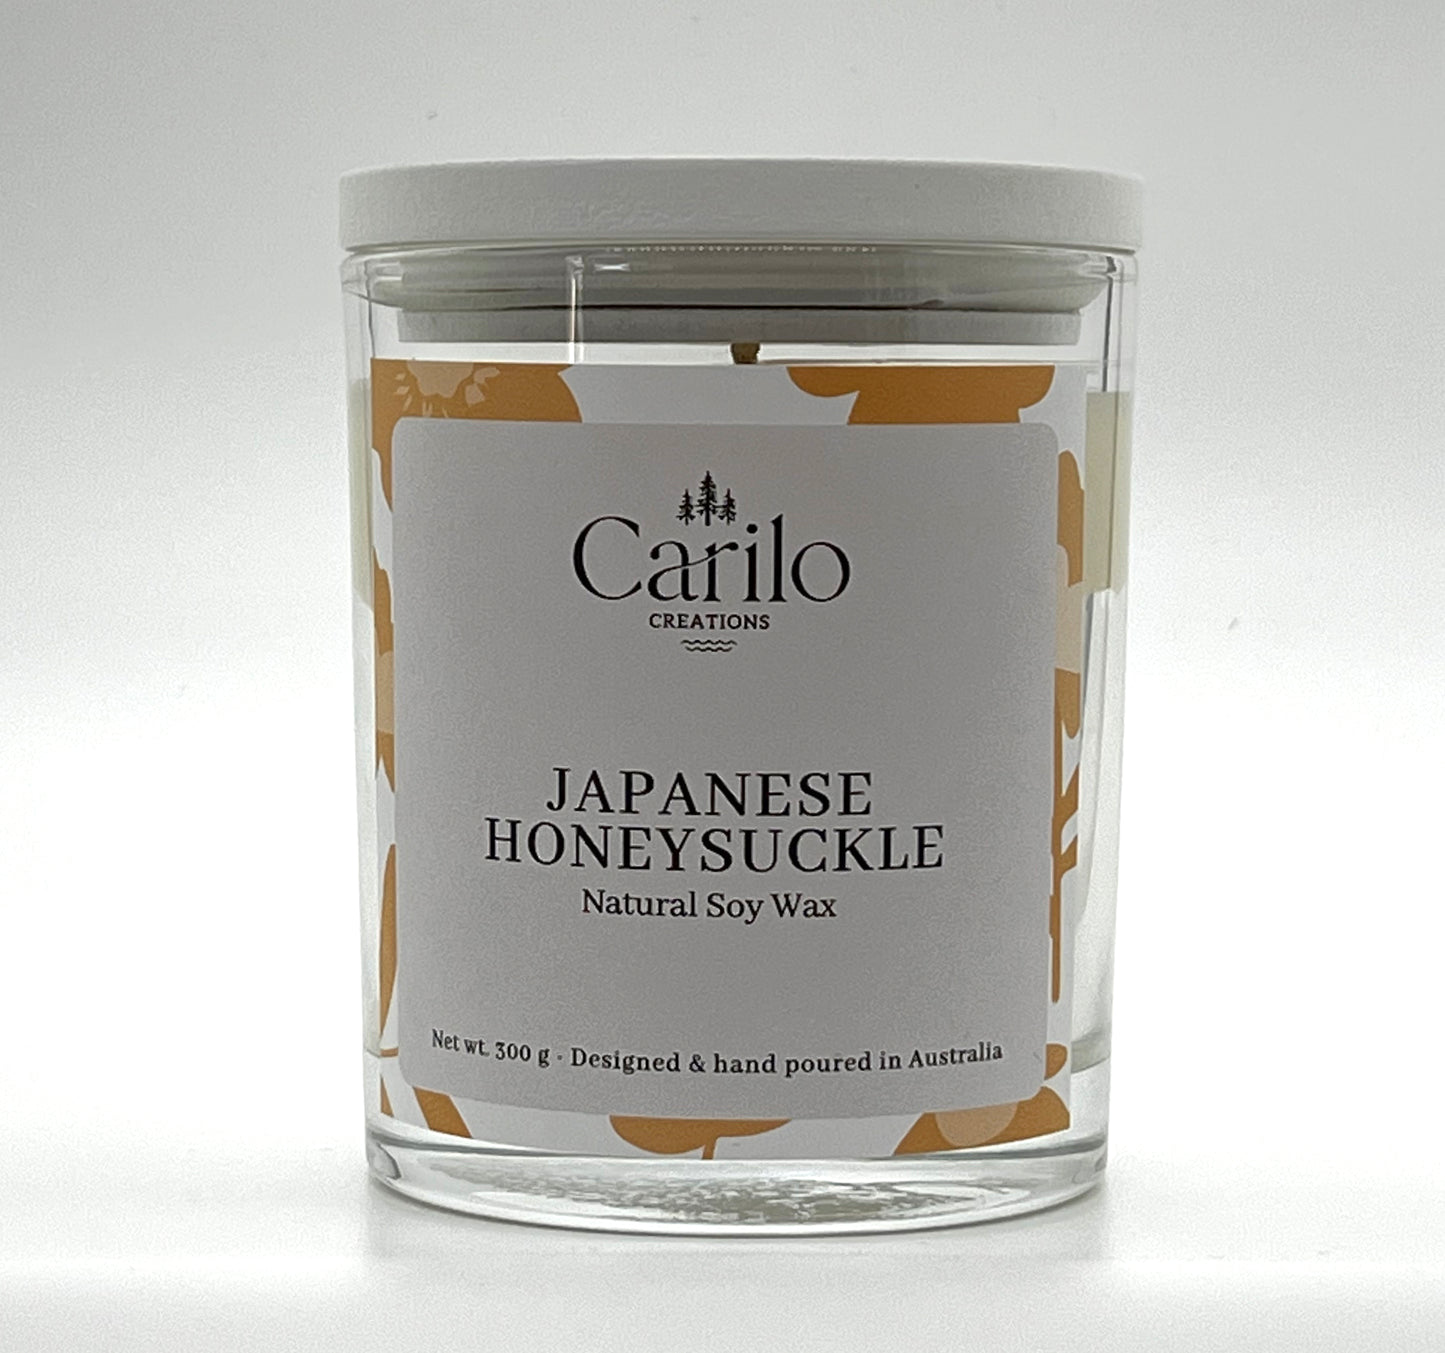 JAPANESE HONEYSUCKLE SCENTED CANDLE - 300g